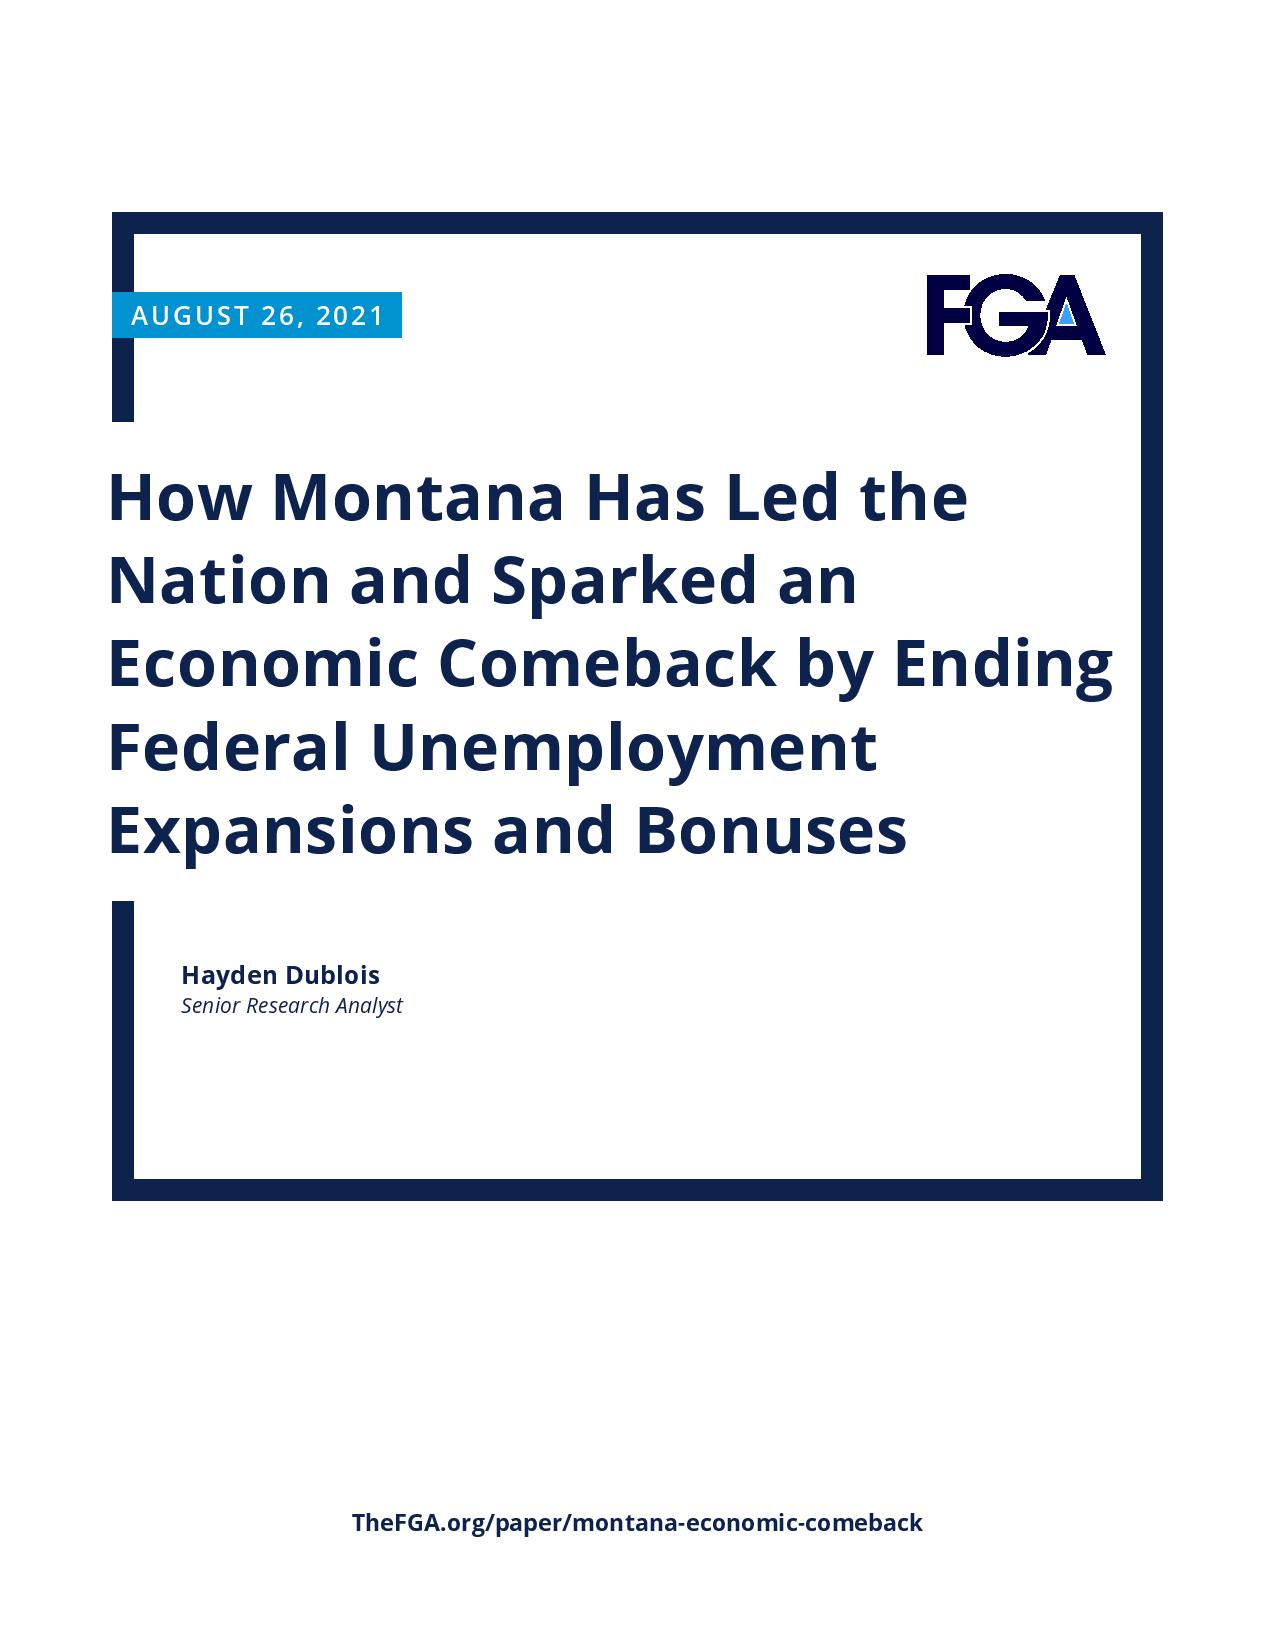 How Montana Has Led the Nation and Sparked an Economic Comeback by Ending Federal Unemployment Expansions and Bonuses